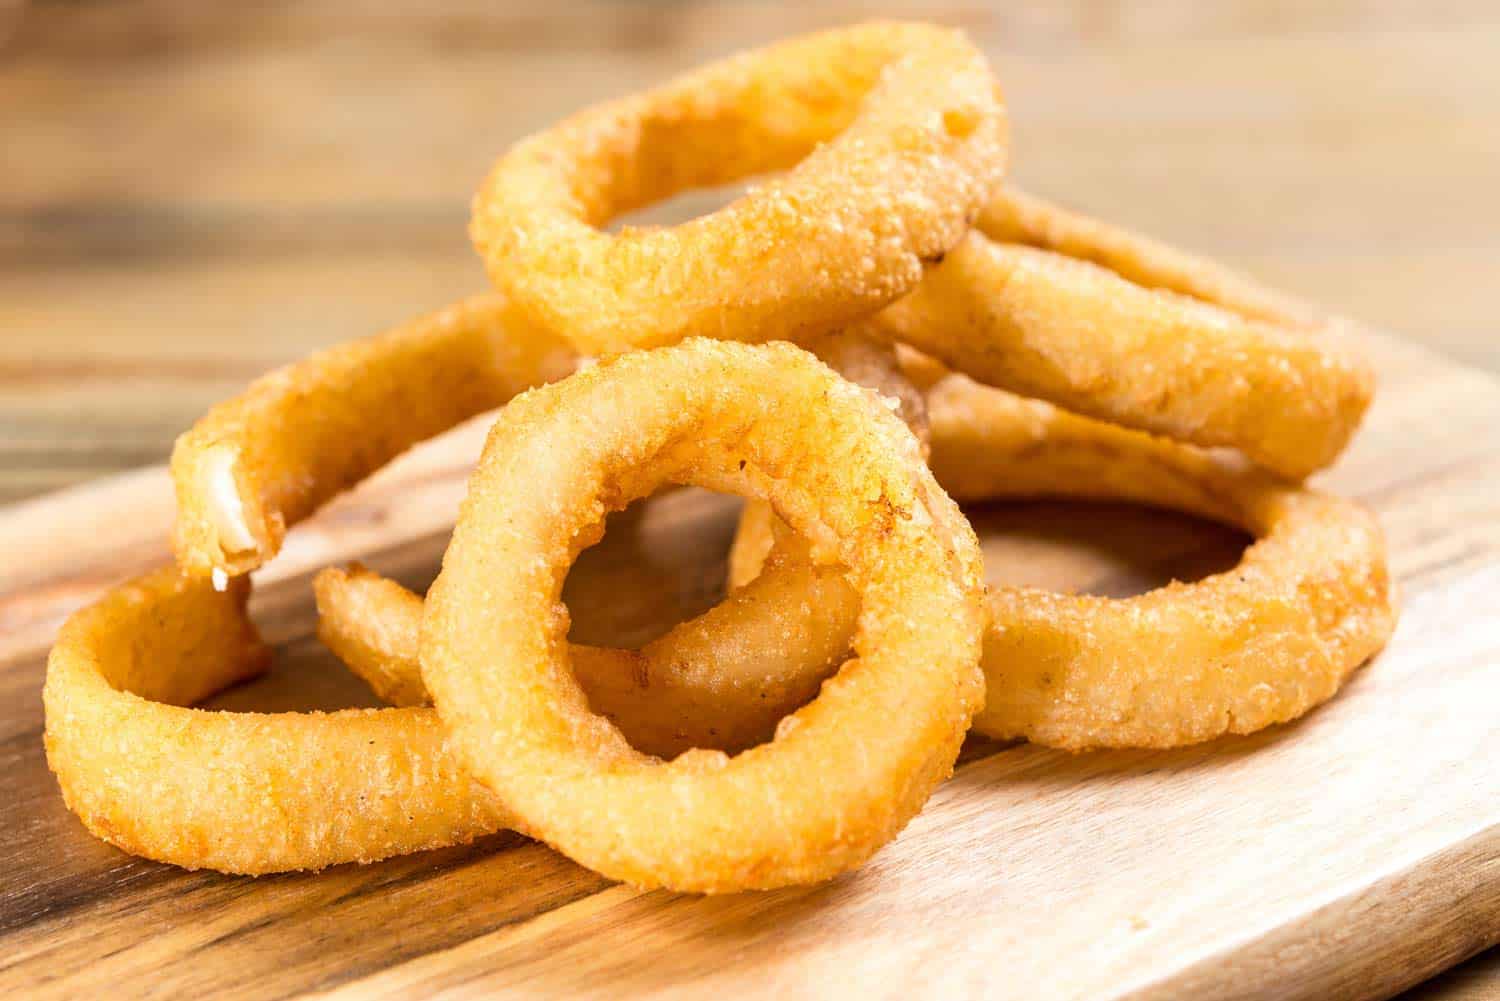 Recipe for a&w onion rings